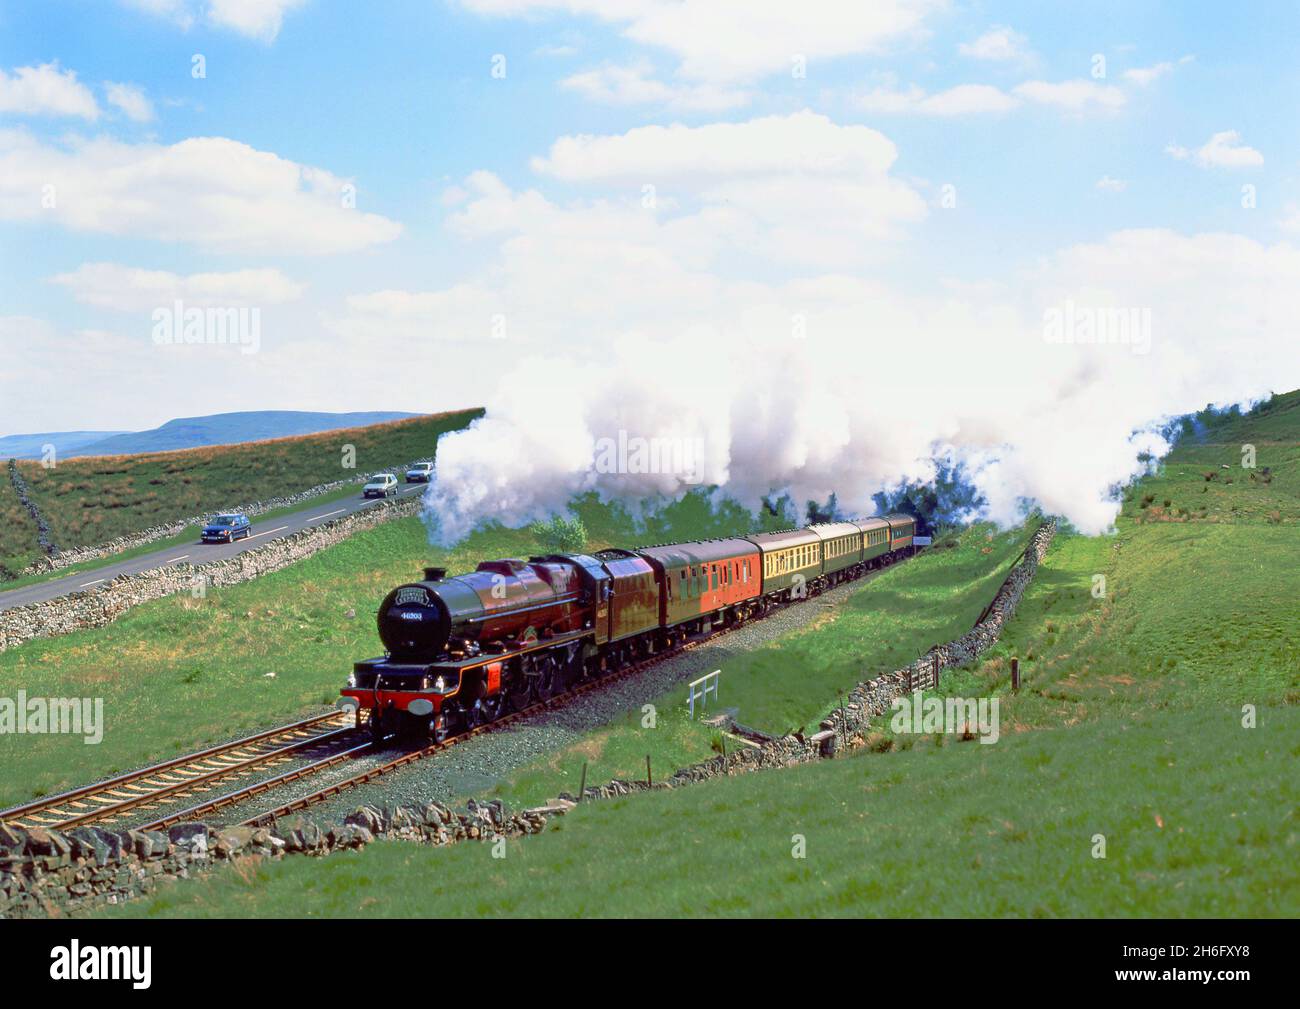 Princess class no 46203 Princess Margaret Rose coming out of Shotlock Hill Tunnel, Settle to Carlisle Railway, England Stock Photo